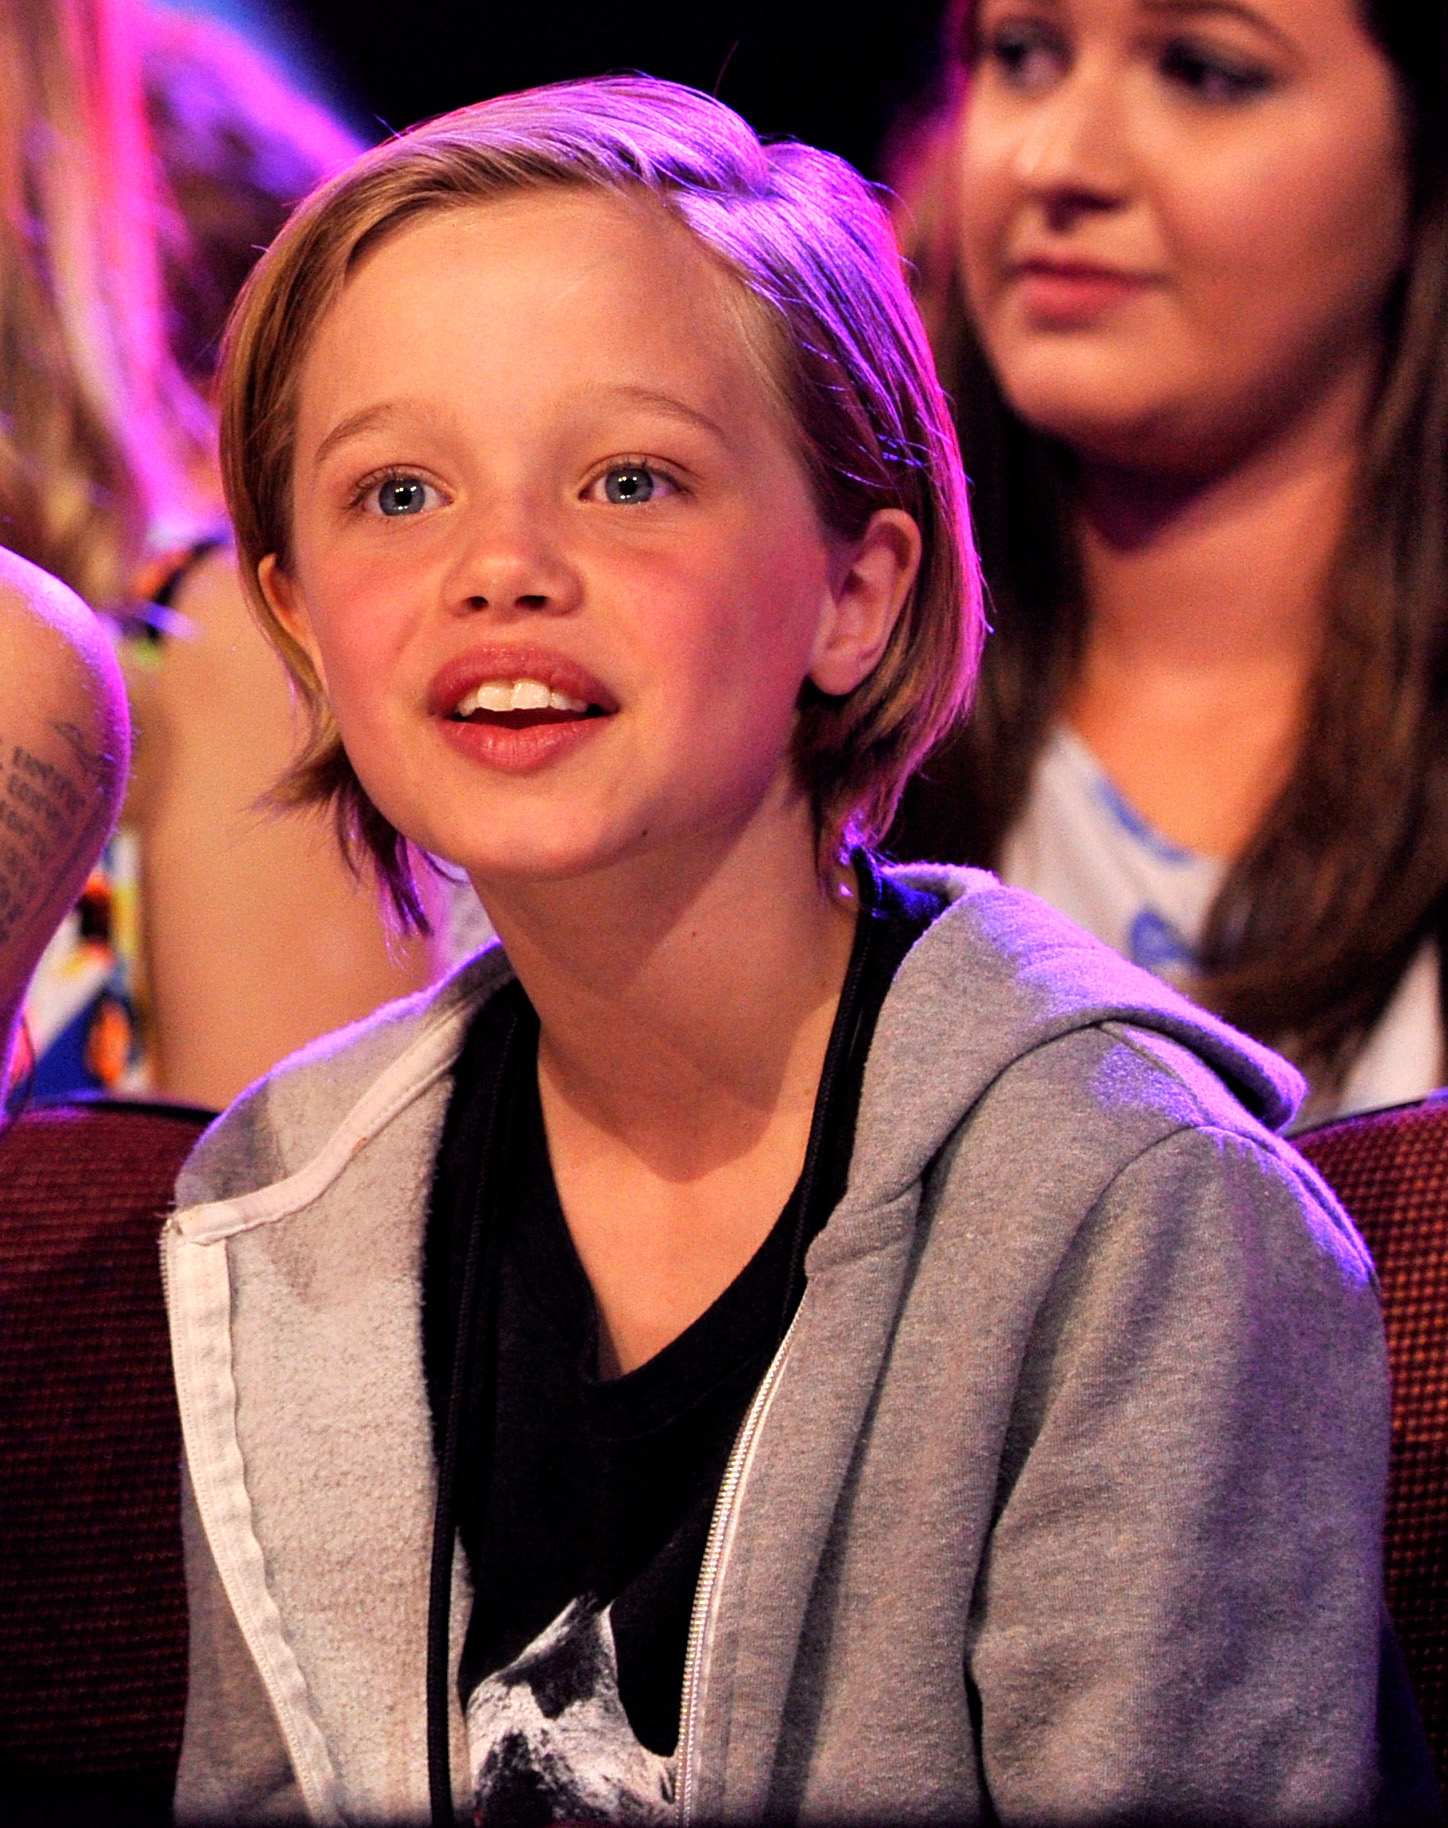 Shiloh in the audience during Nickelodeon’s Kids’ Choice Awards in 2015